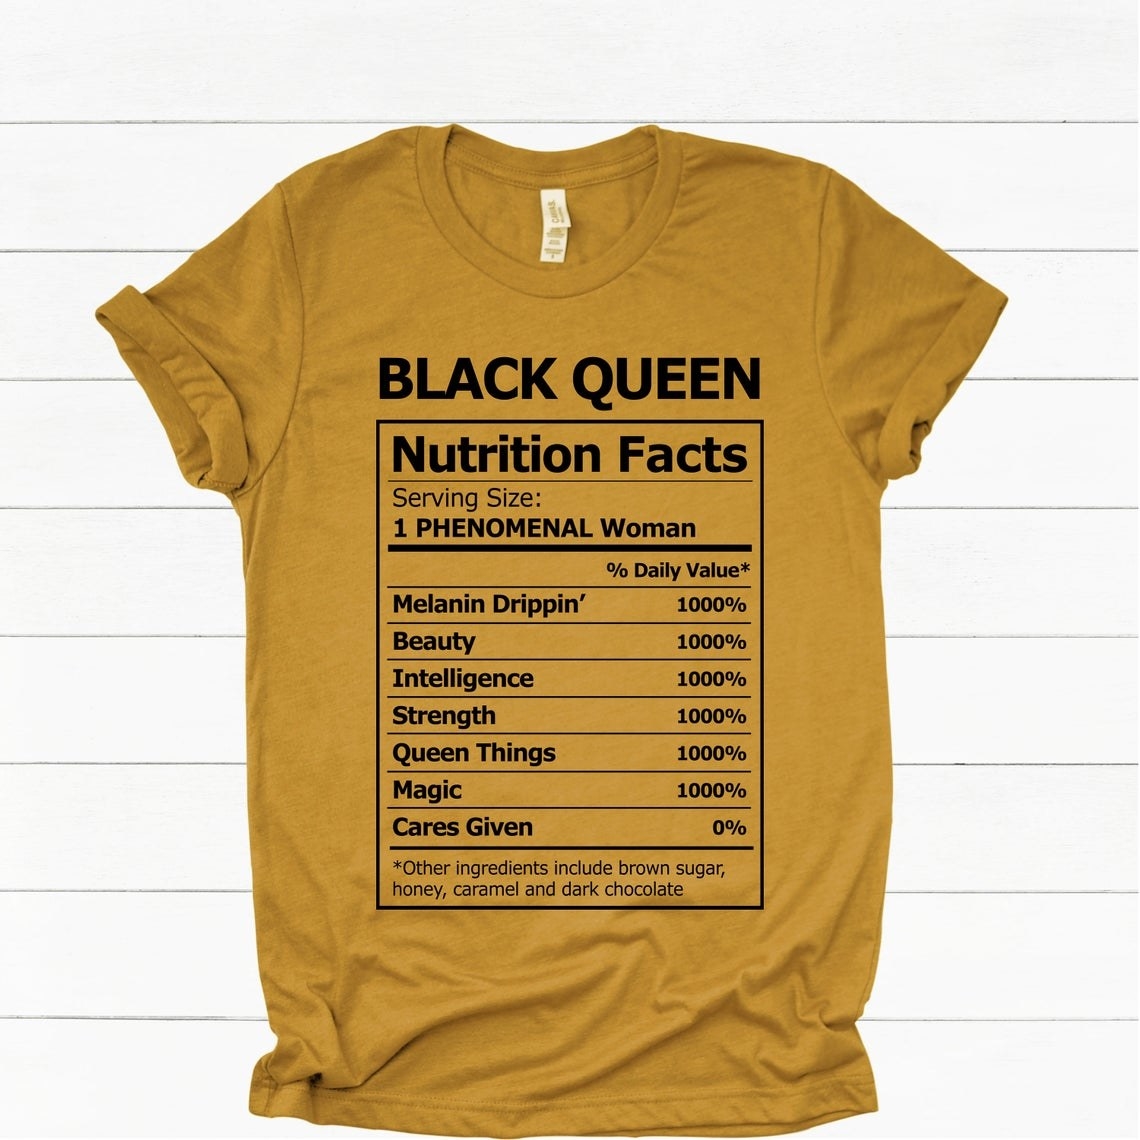 Mustard tee with the words &quot;Black Queen&quot; and &quot;Nutrition Facts&quot; with several strengths listed in the style of an ingredient list